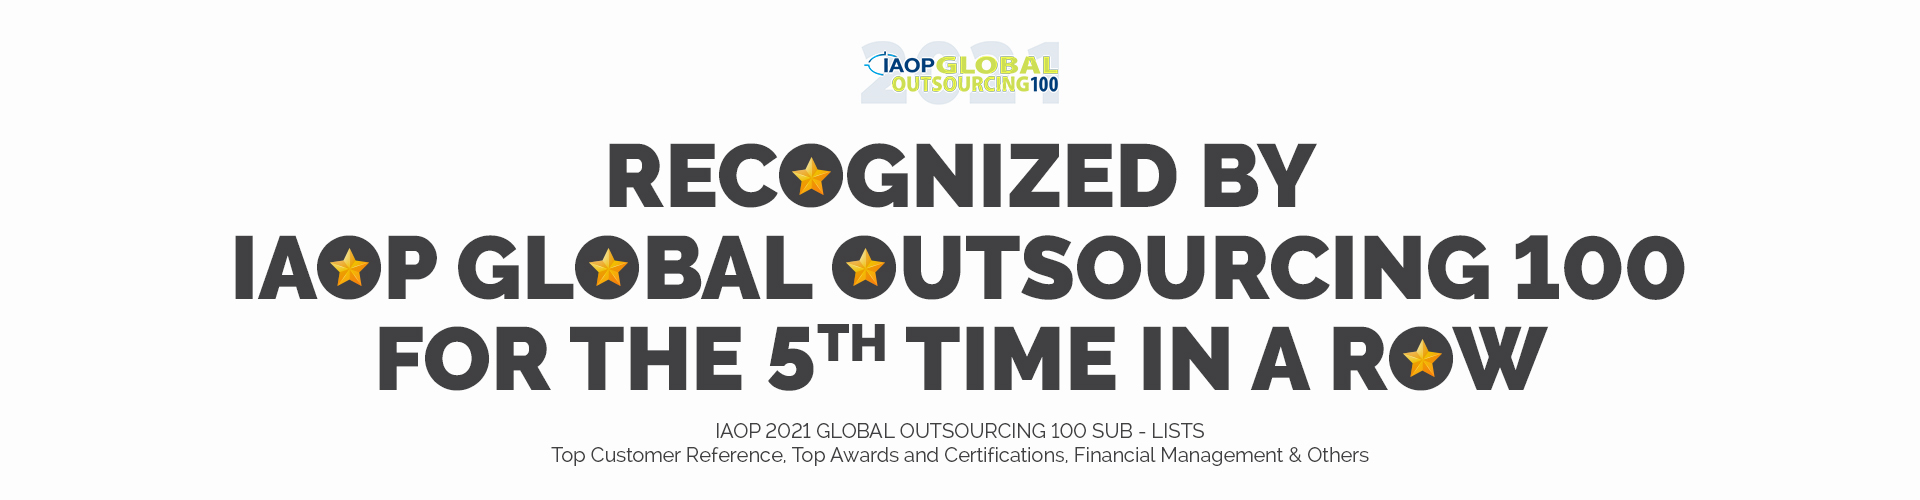 Recognized by IAOP Global Outsourcing 100 for the 5th time in a row